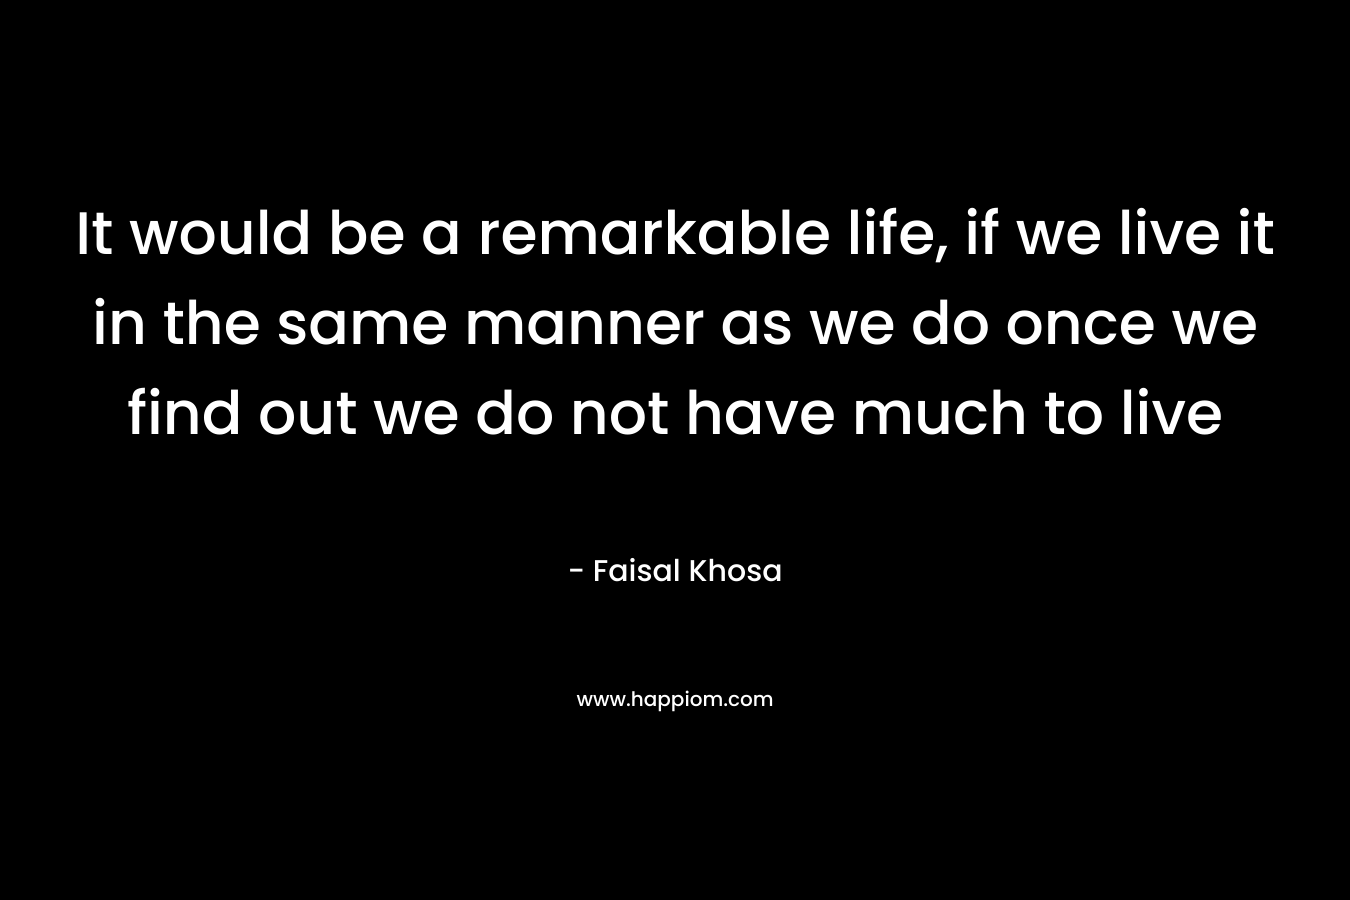 It would be a remarkable life, if we live it in the same manner as we do once we find out we do not have much to live